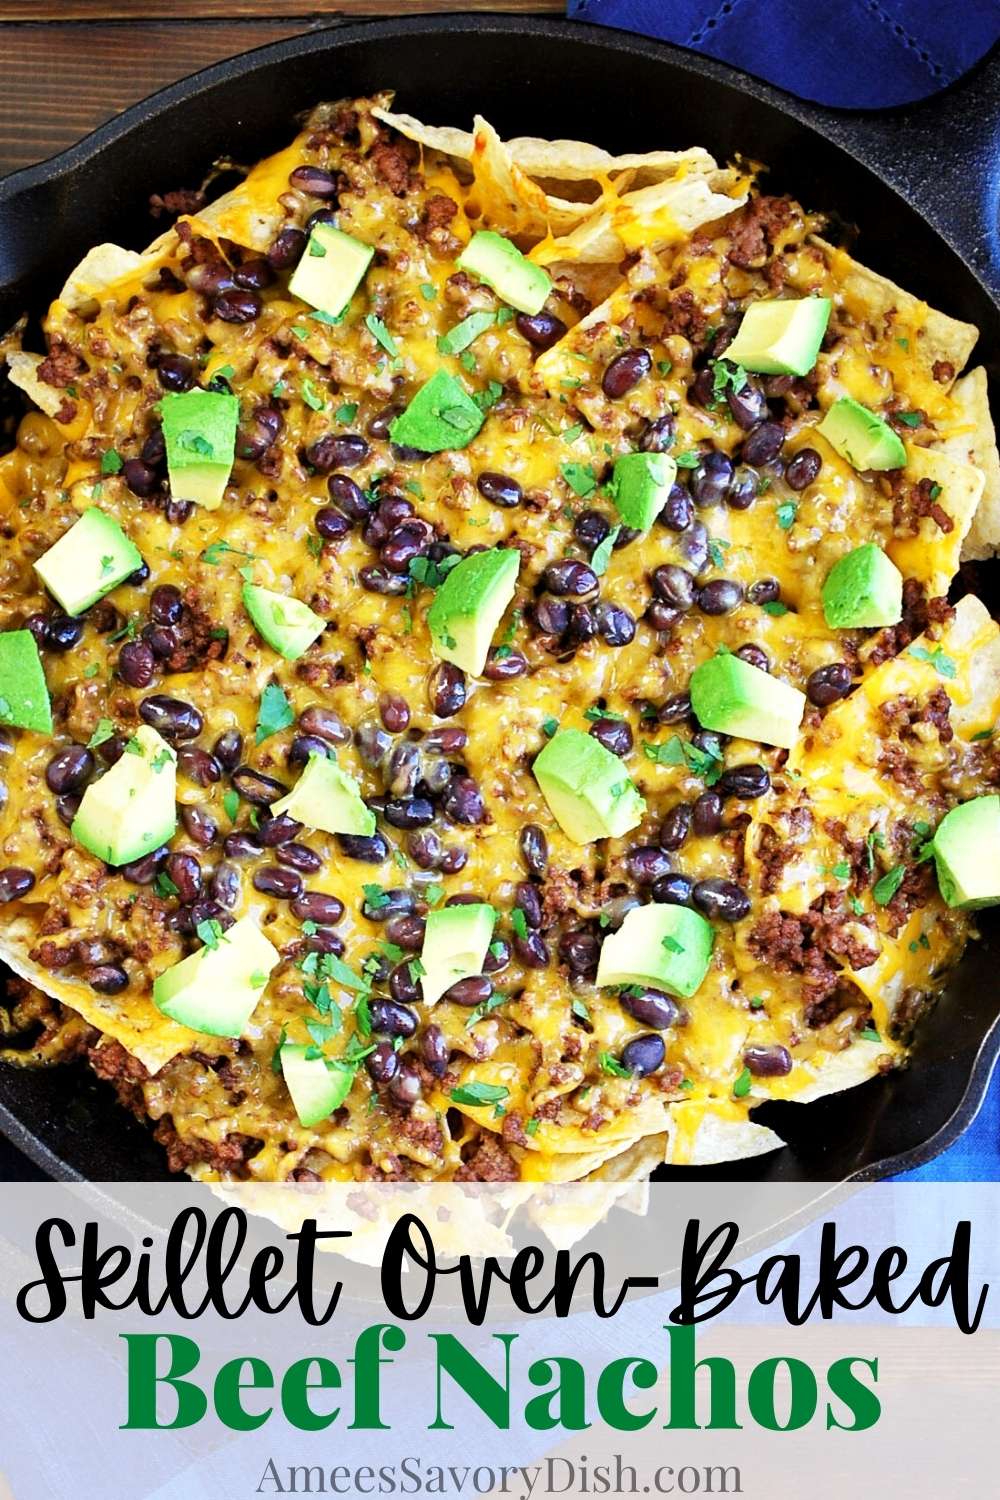 An easy oven-baked skillet nachos recipe made with tortilla chips, black beans, seasoned ground beef, and shredded cheese baked in a cast-iron skillet.  via @Ameessavorydish